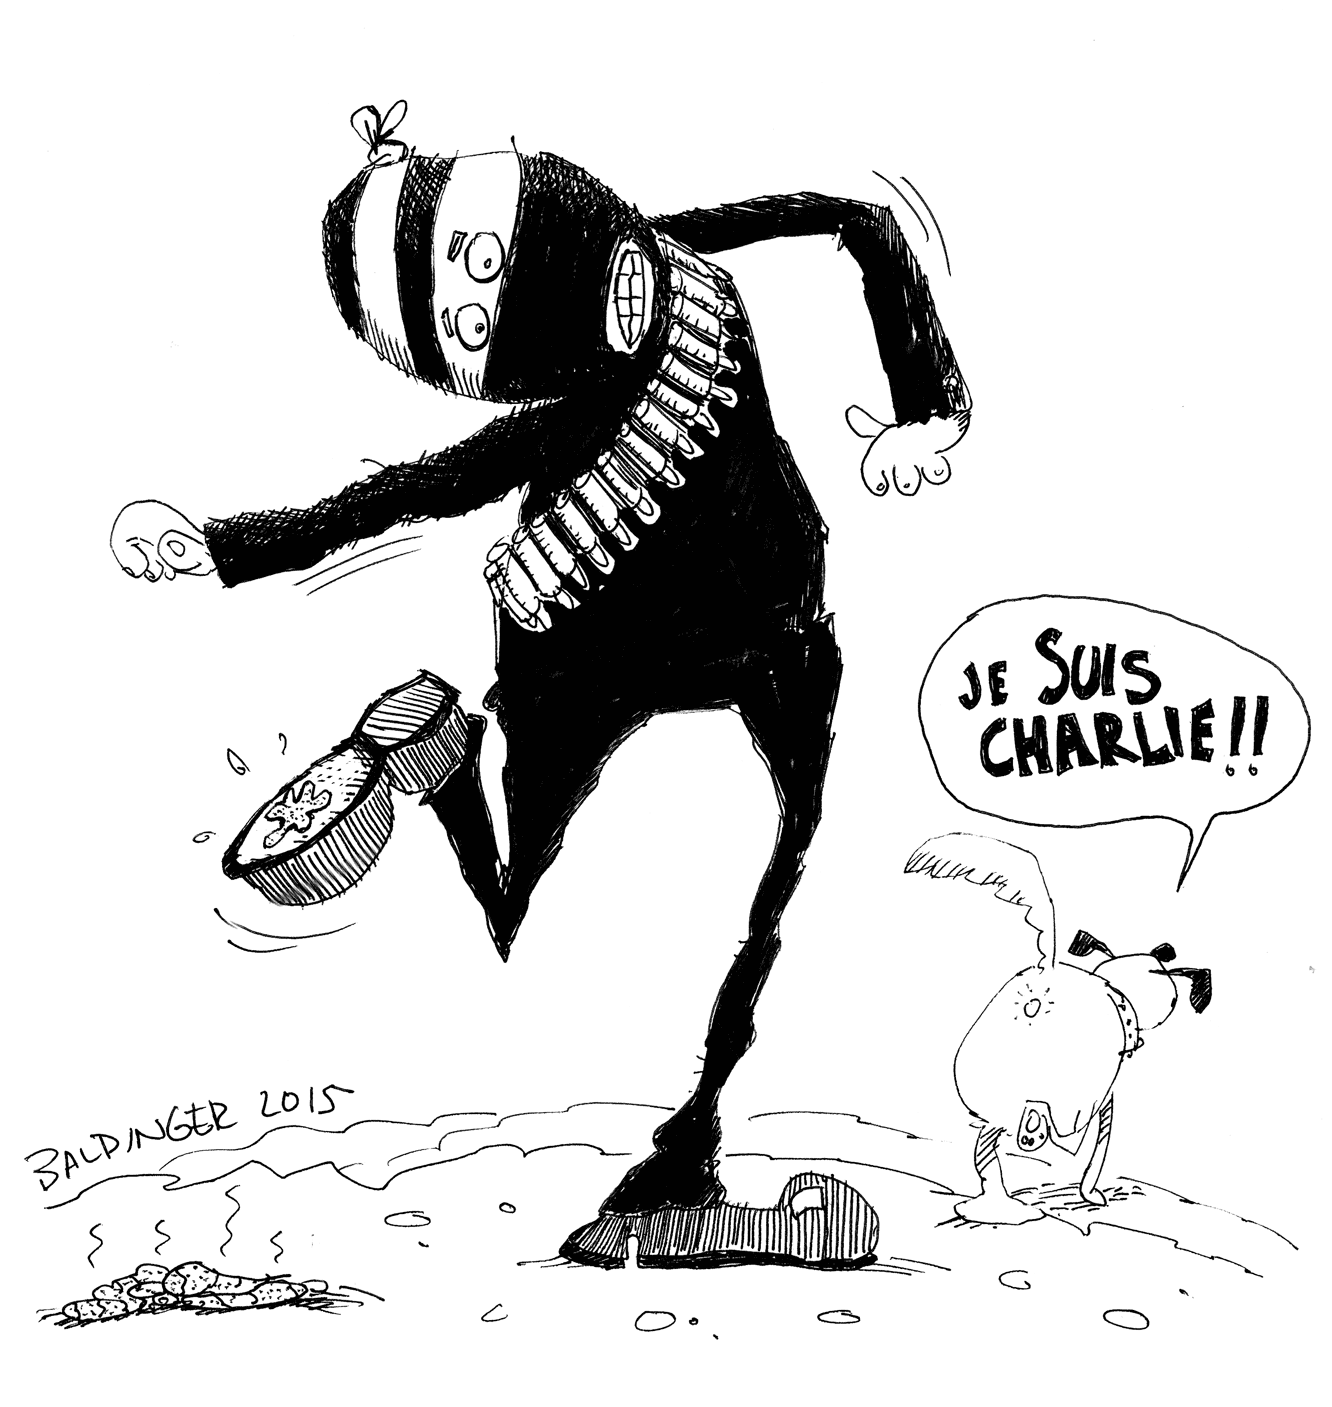 Now You've Stepped In It! cartoon in honor of Charlie Hebdo